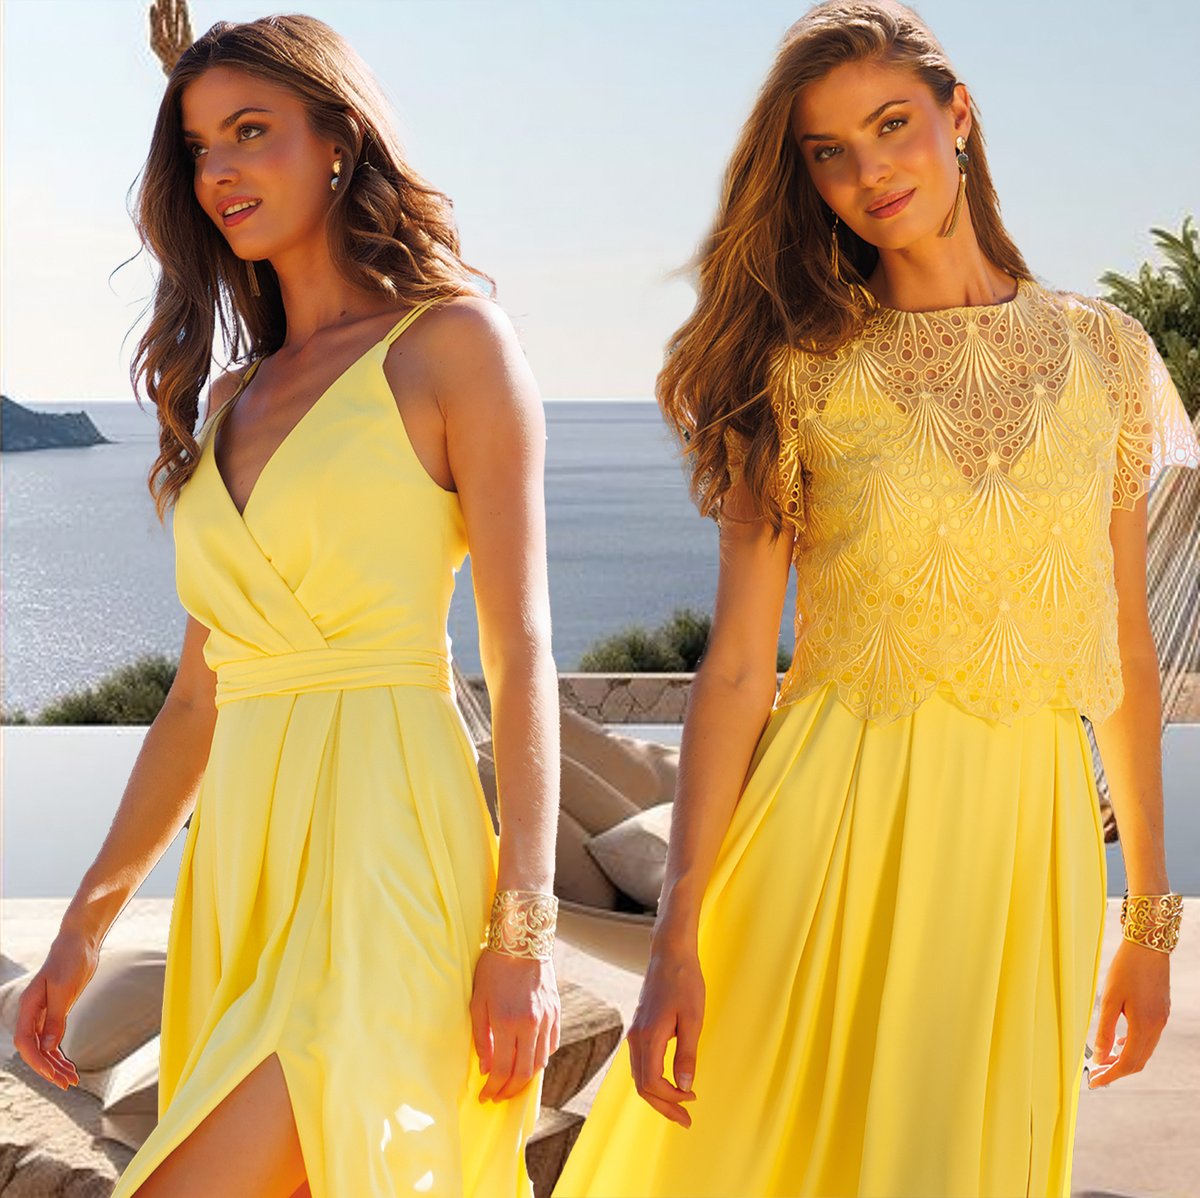 Yellow combi: Lace top combined with a maxi dress in a stunning yellow soft satin

#RaffaelliCasualChique #Raffaelli #Casualchique #satindress #yellowdress #summerdress #fashion #longdress #maxidress #lacetop #everyoccasion #dinnerwear #weddingguest  #lentefeest #communiefeest